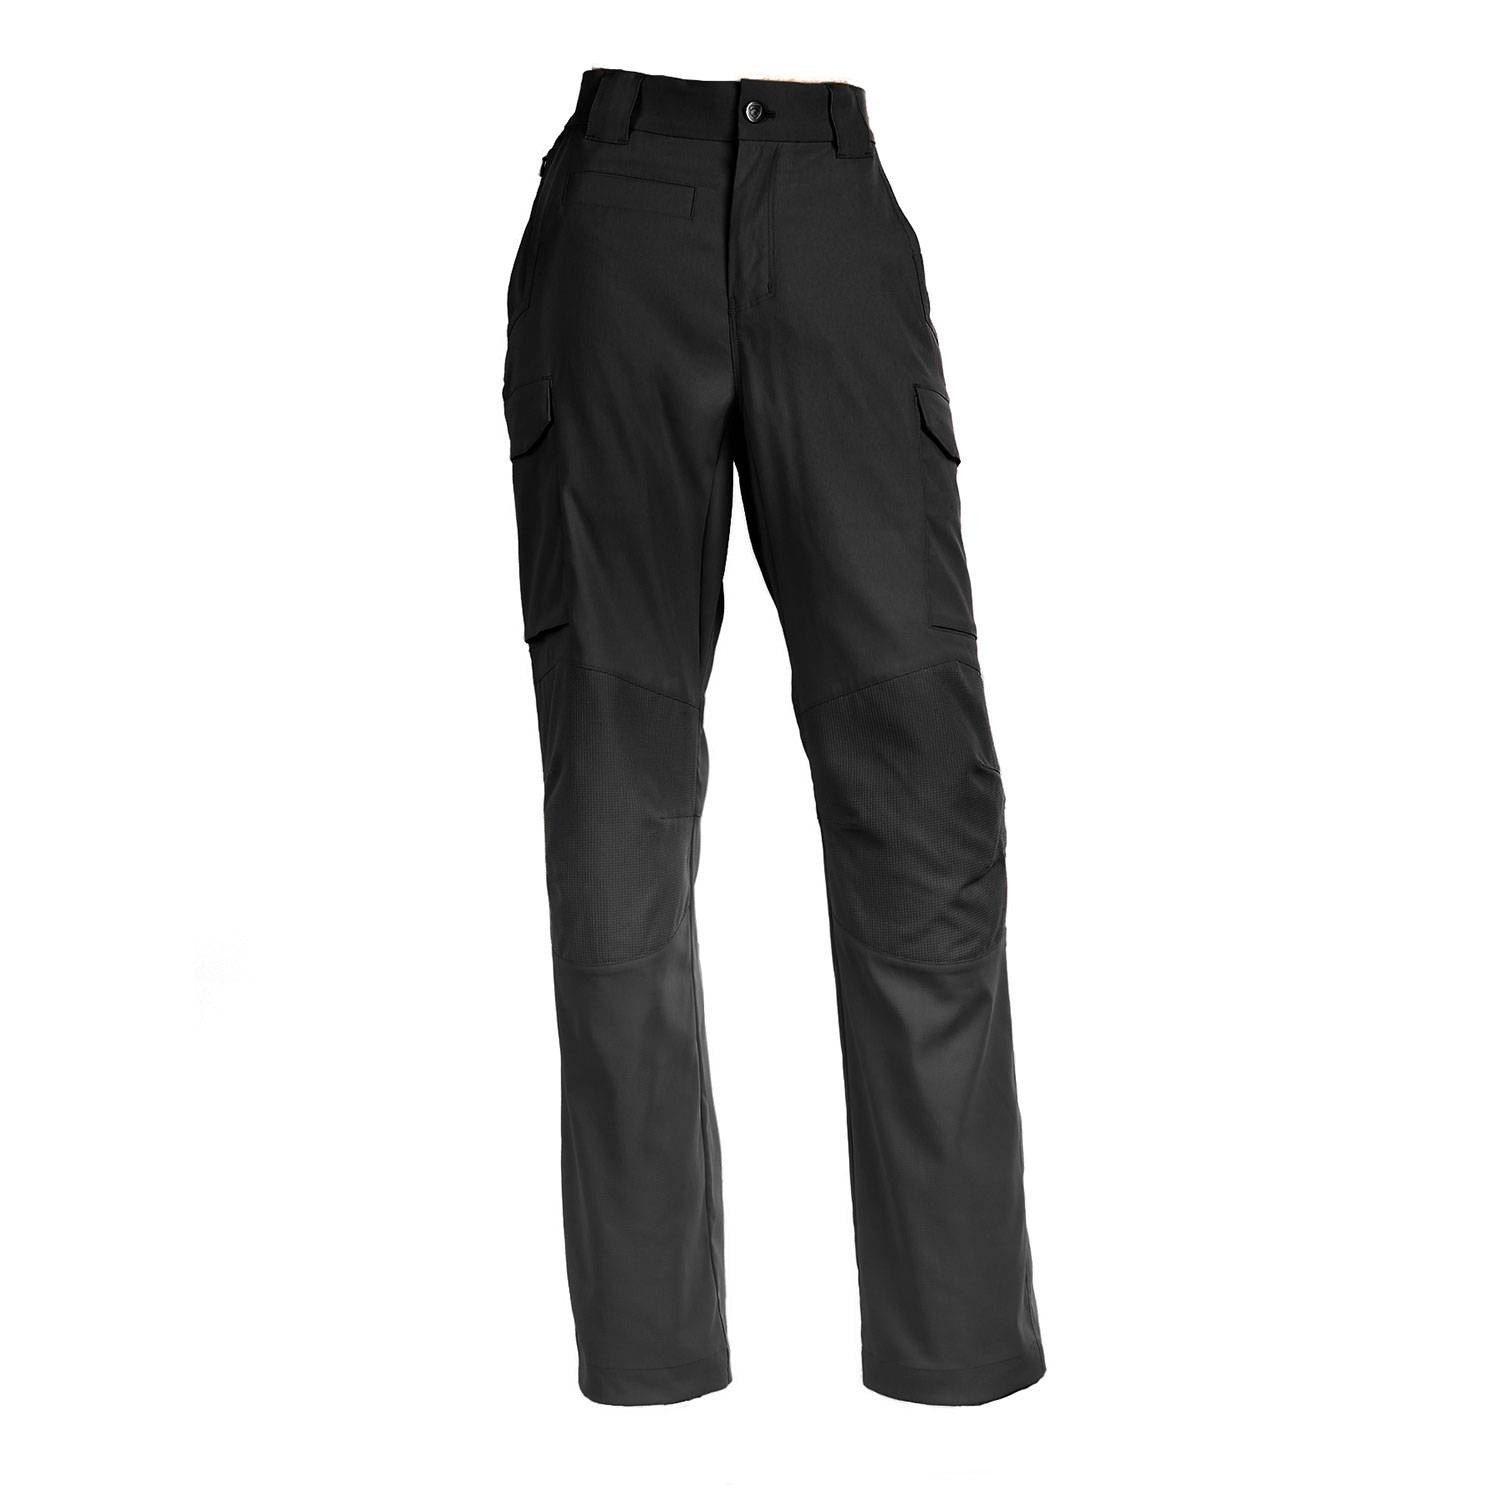 Women's Cargo Pants guide and information resource about Women's Cargo  Pants : Clothing, Style and Fashion Style Directory by Apparel Search